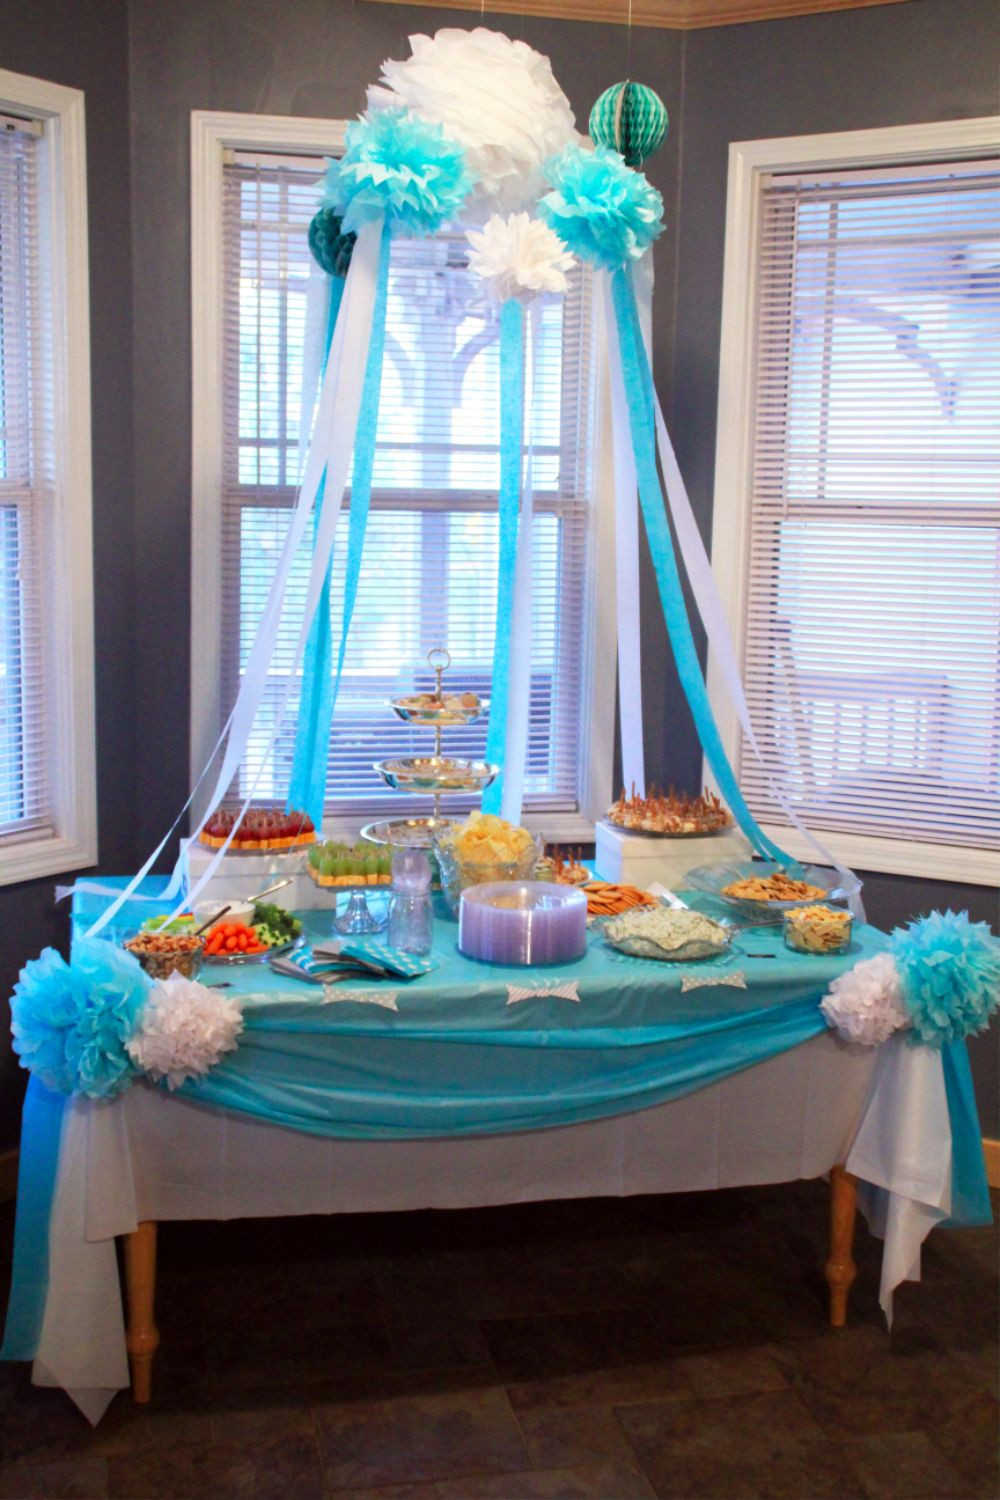 Decor Ideas For Baby Shower
 Baby Shower Decoration Ideas Southern Couture